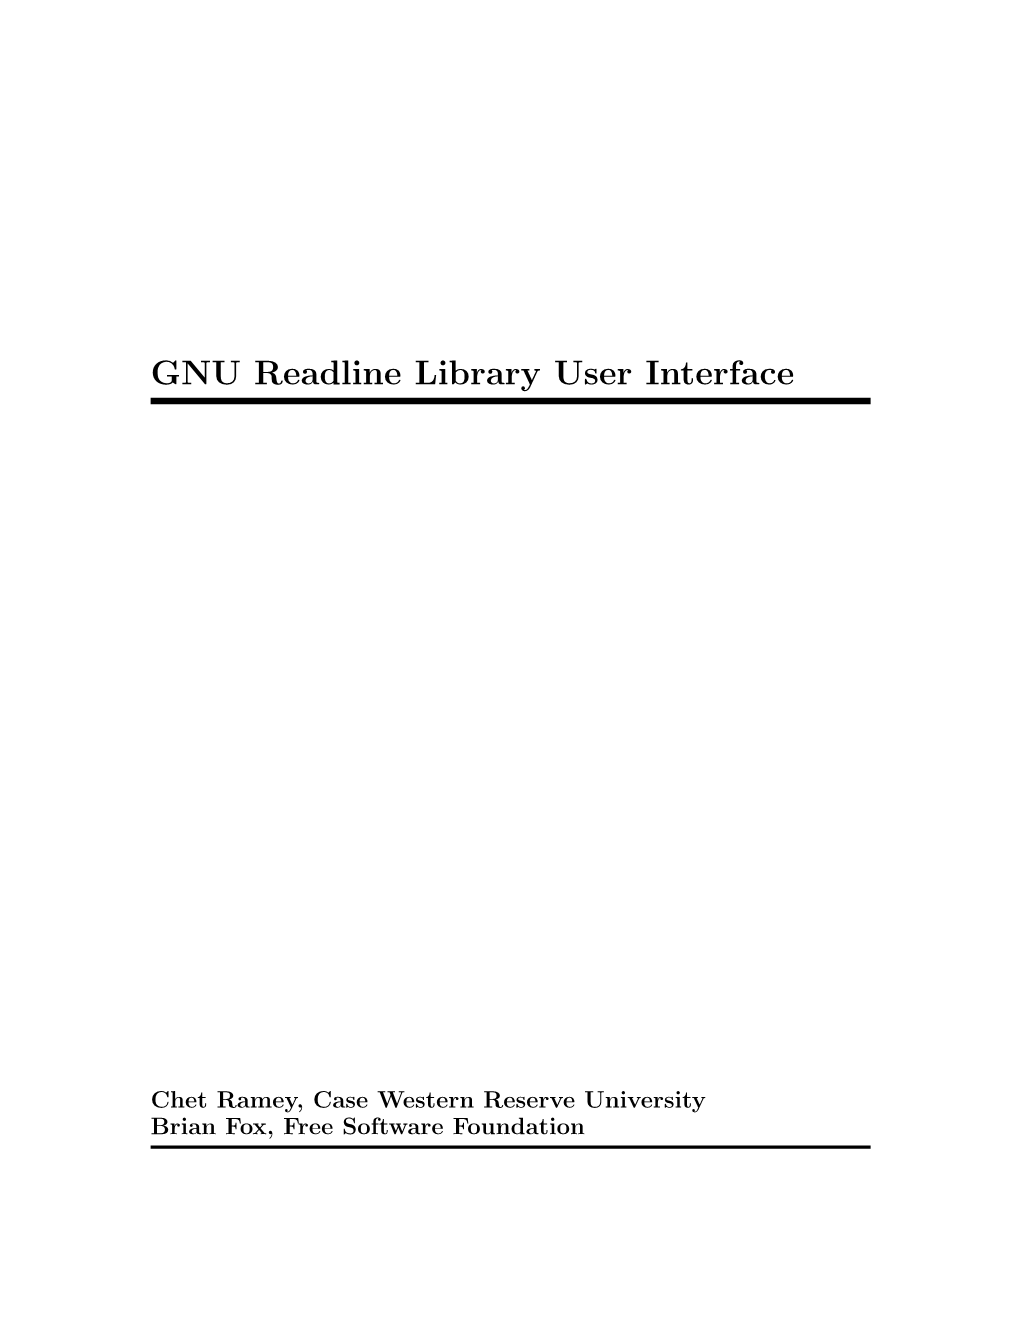 GNU Readline Library User Interface Edition 6.1, for Readline Library Version 6.1